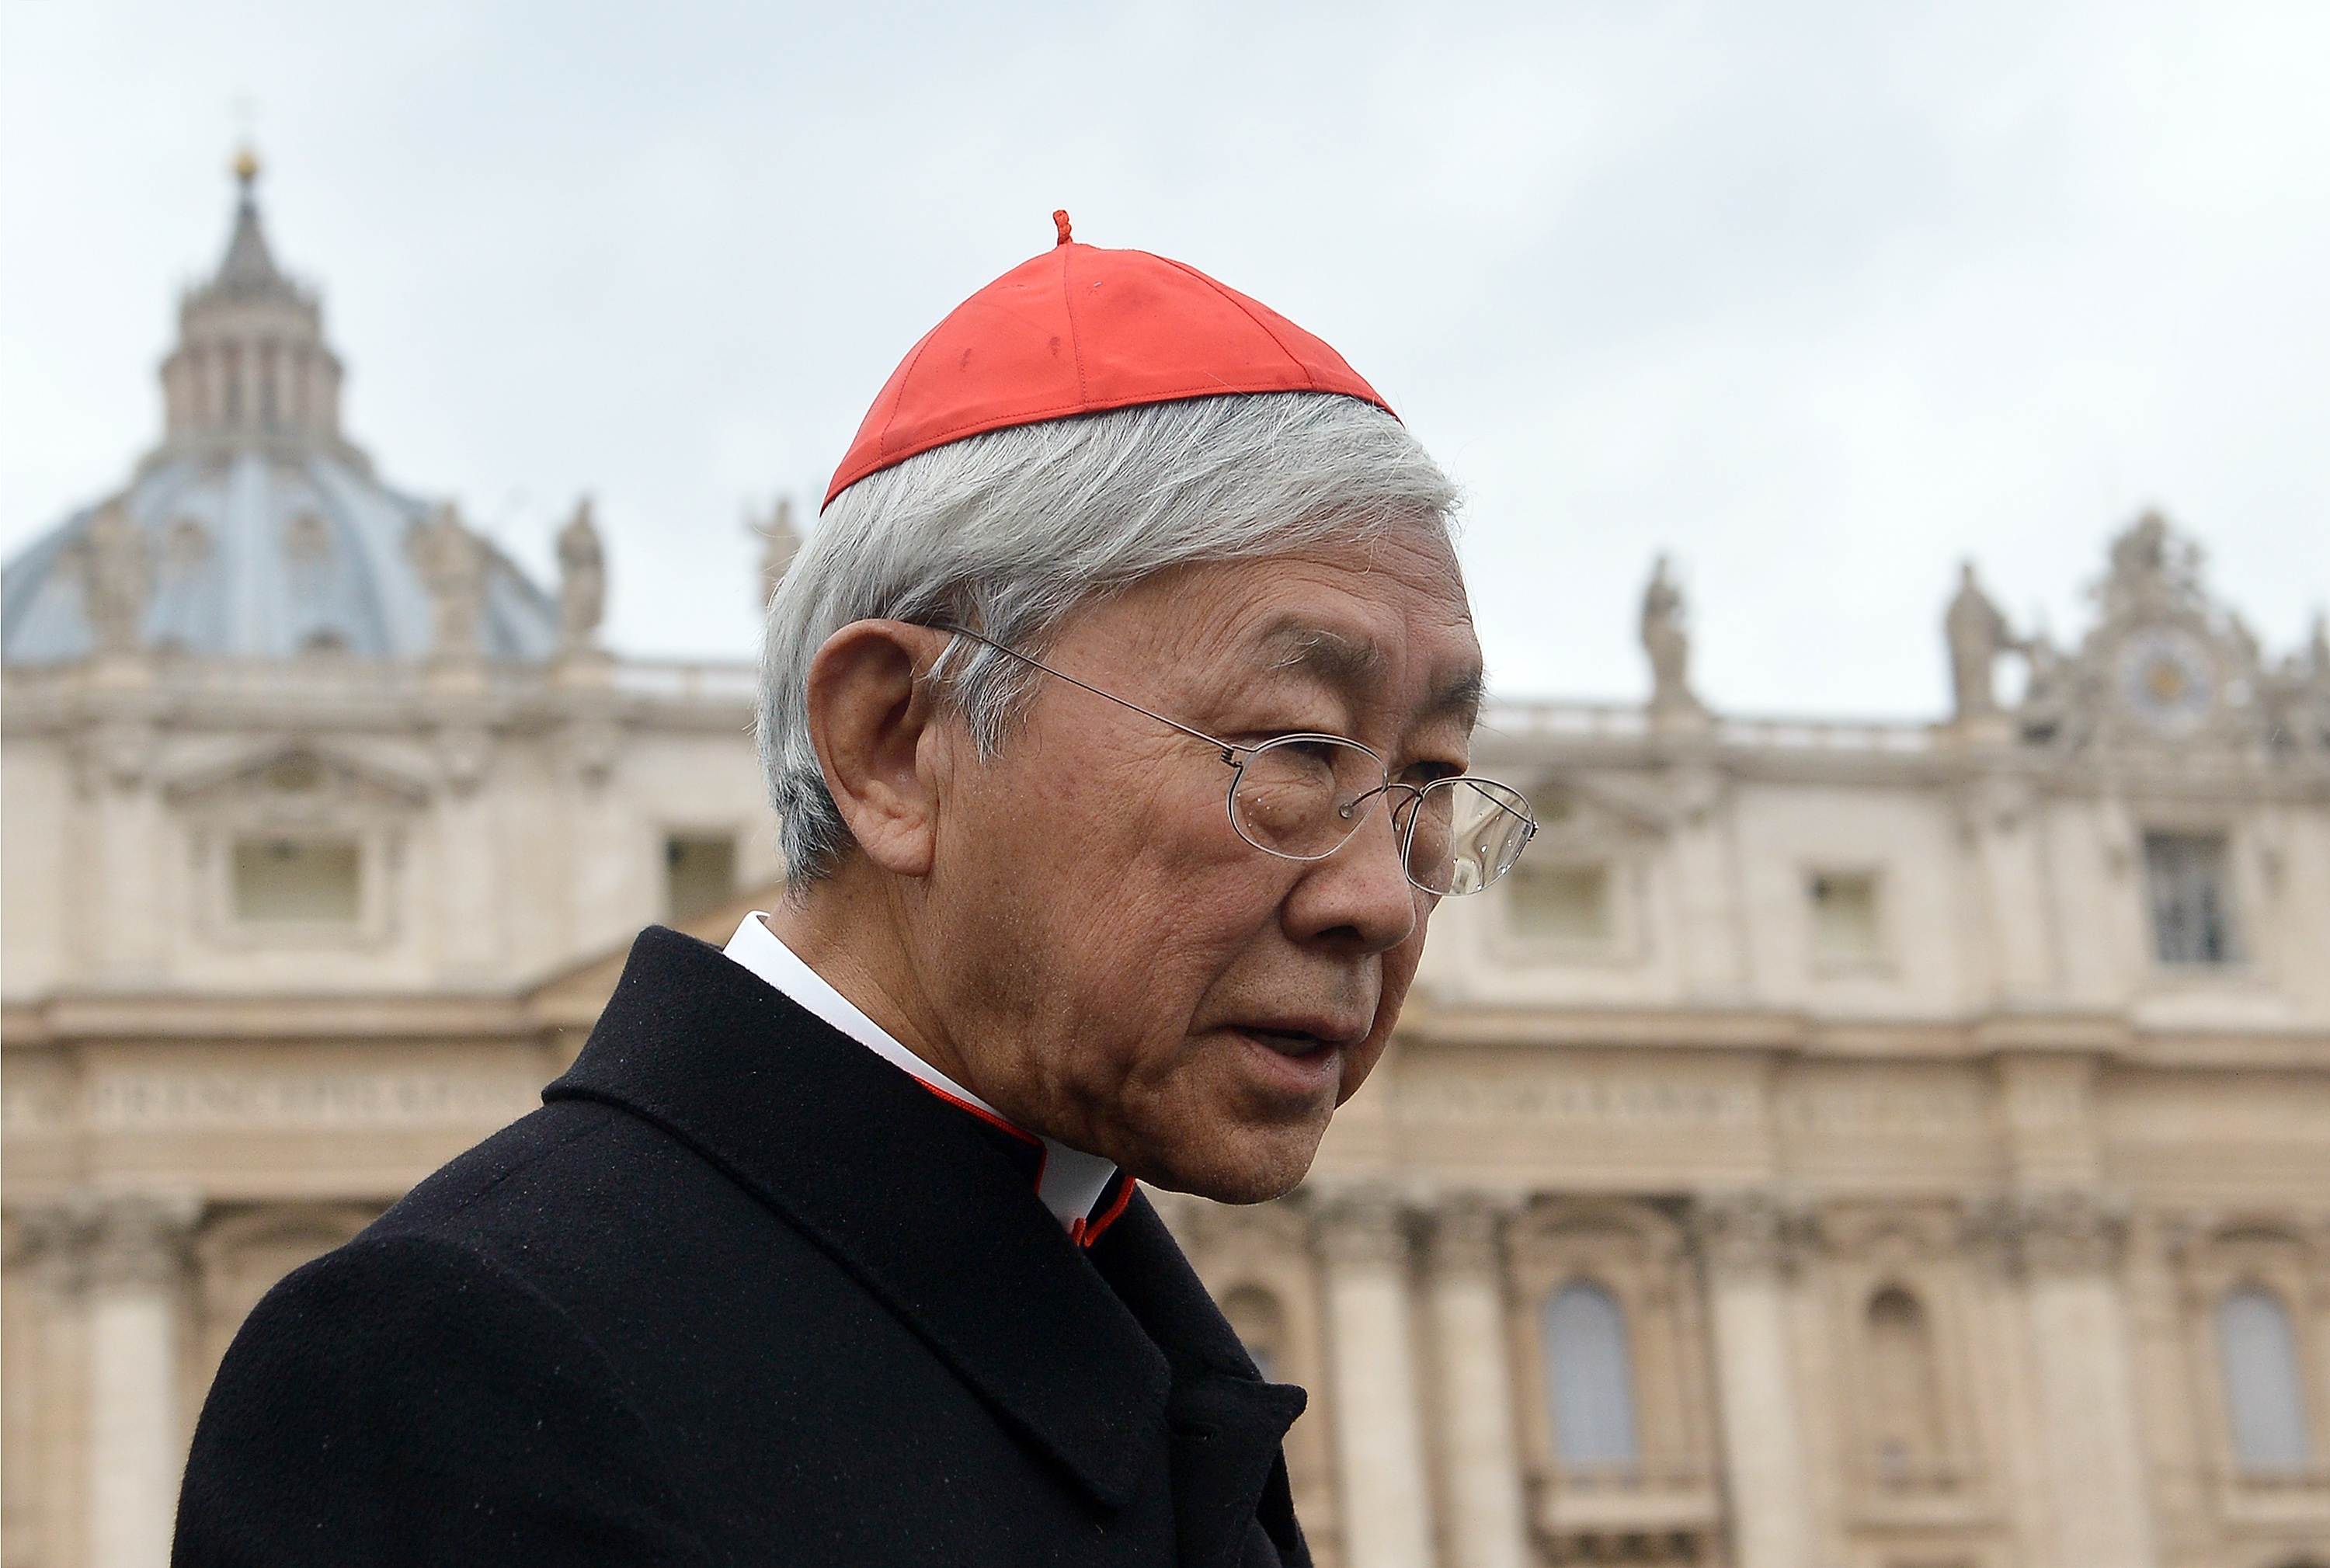 Hong Kong cardinal Joseph Zen Ze-Kiun walks on St Peter's square after a pre-conclave meeting on March 6, 2013 at the Vatican. (Alberto Pizzoli—AFP/Getty Images)